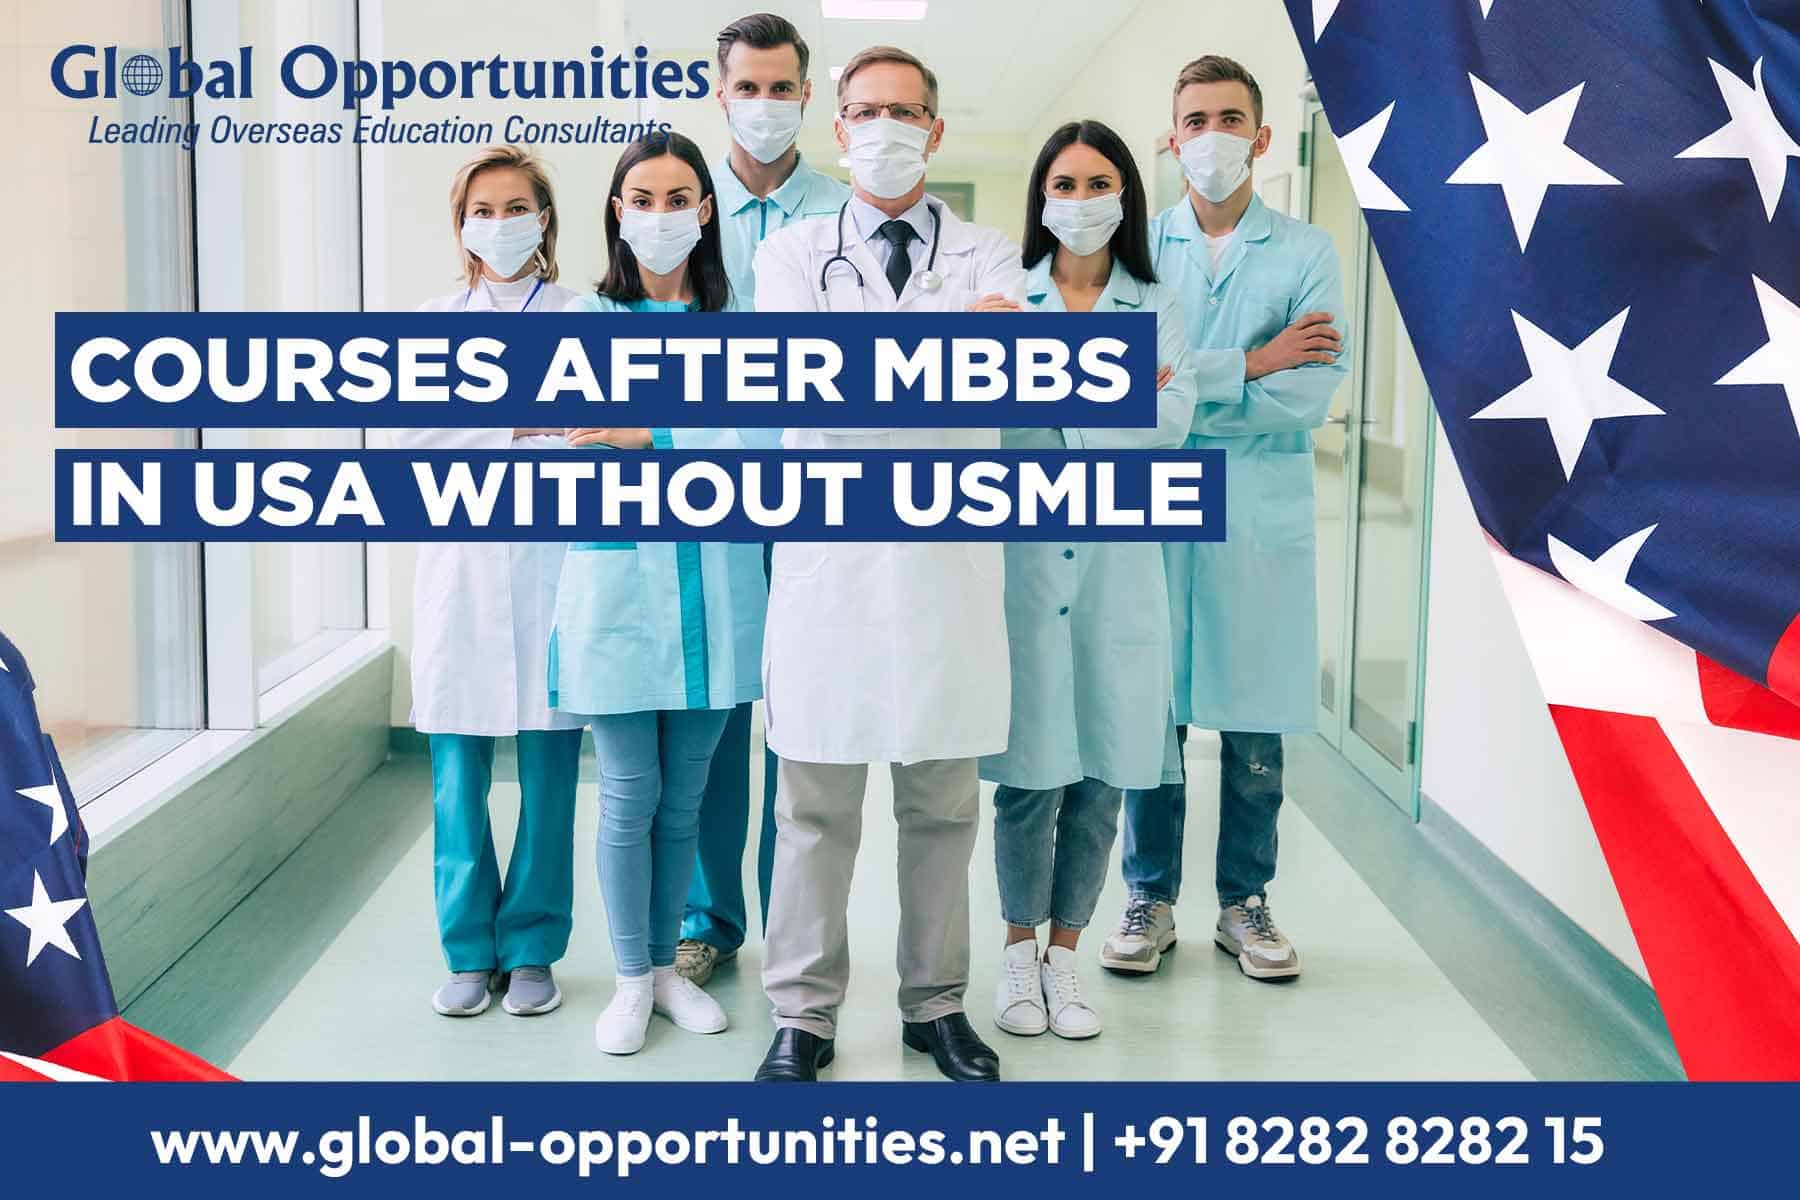 Courses after MBBS in USA without USMLE